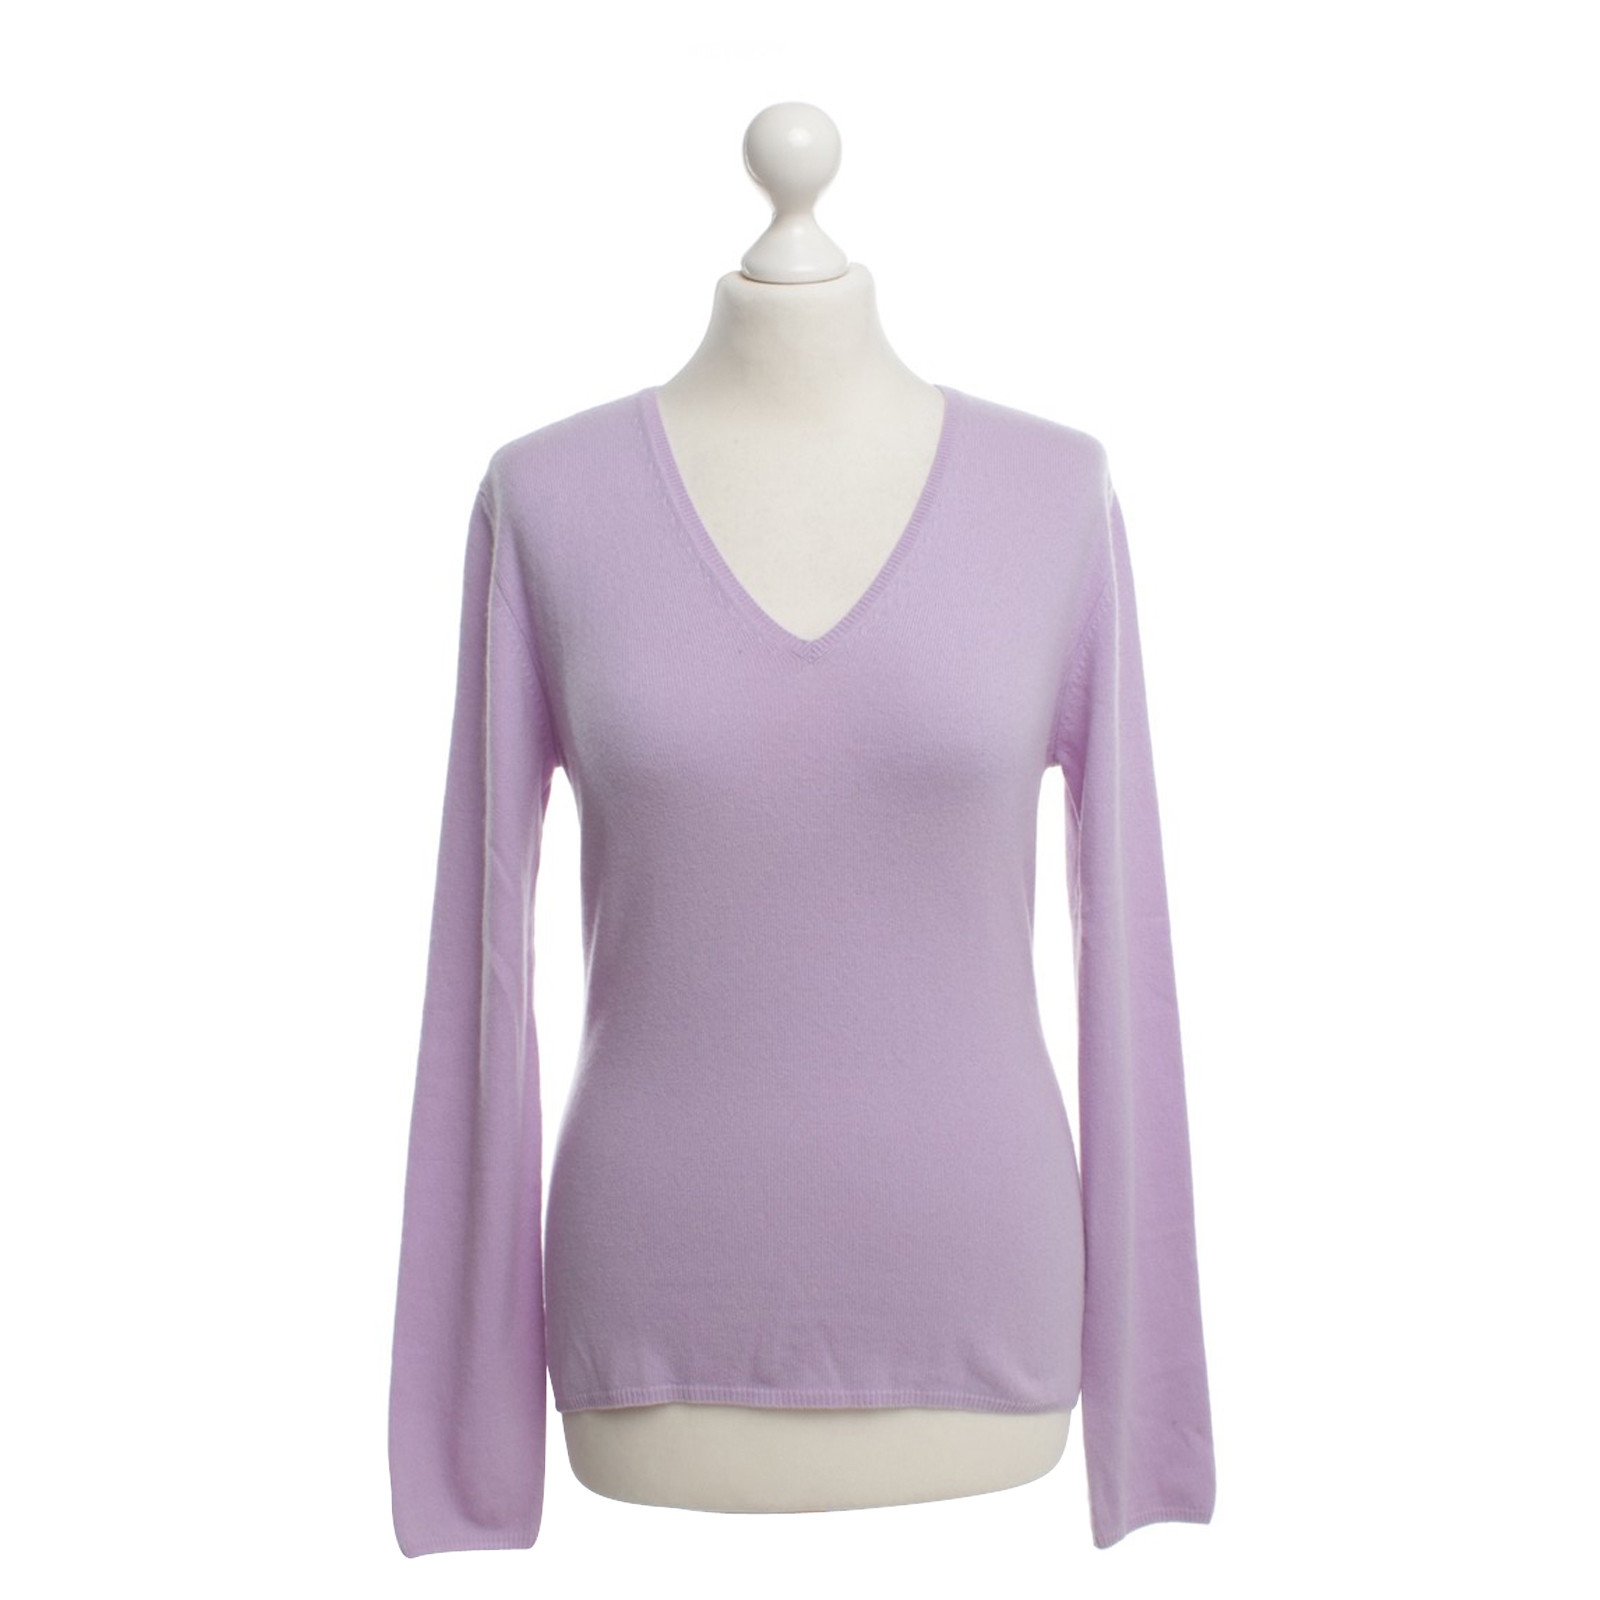 Allude Cashmere Sweaters In Lilac Second Hand Allude Cashmere Sweaters In Lilac Buy Used For 135